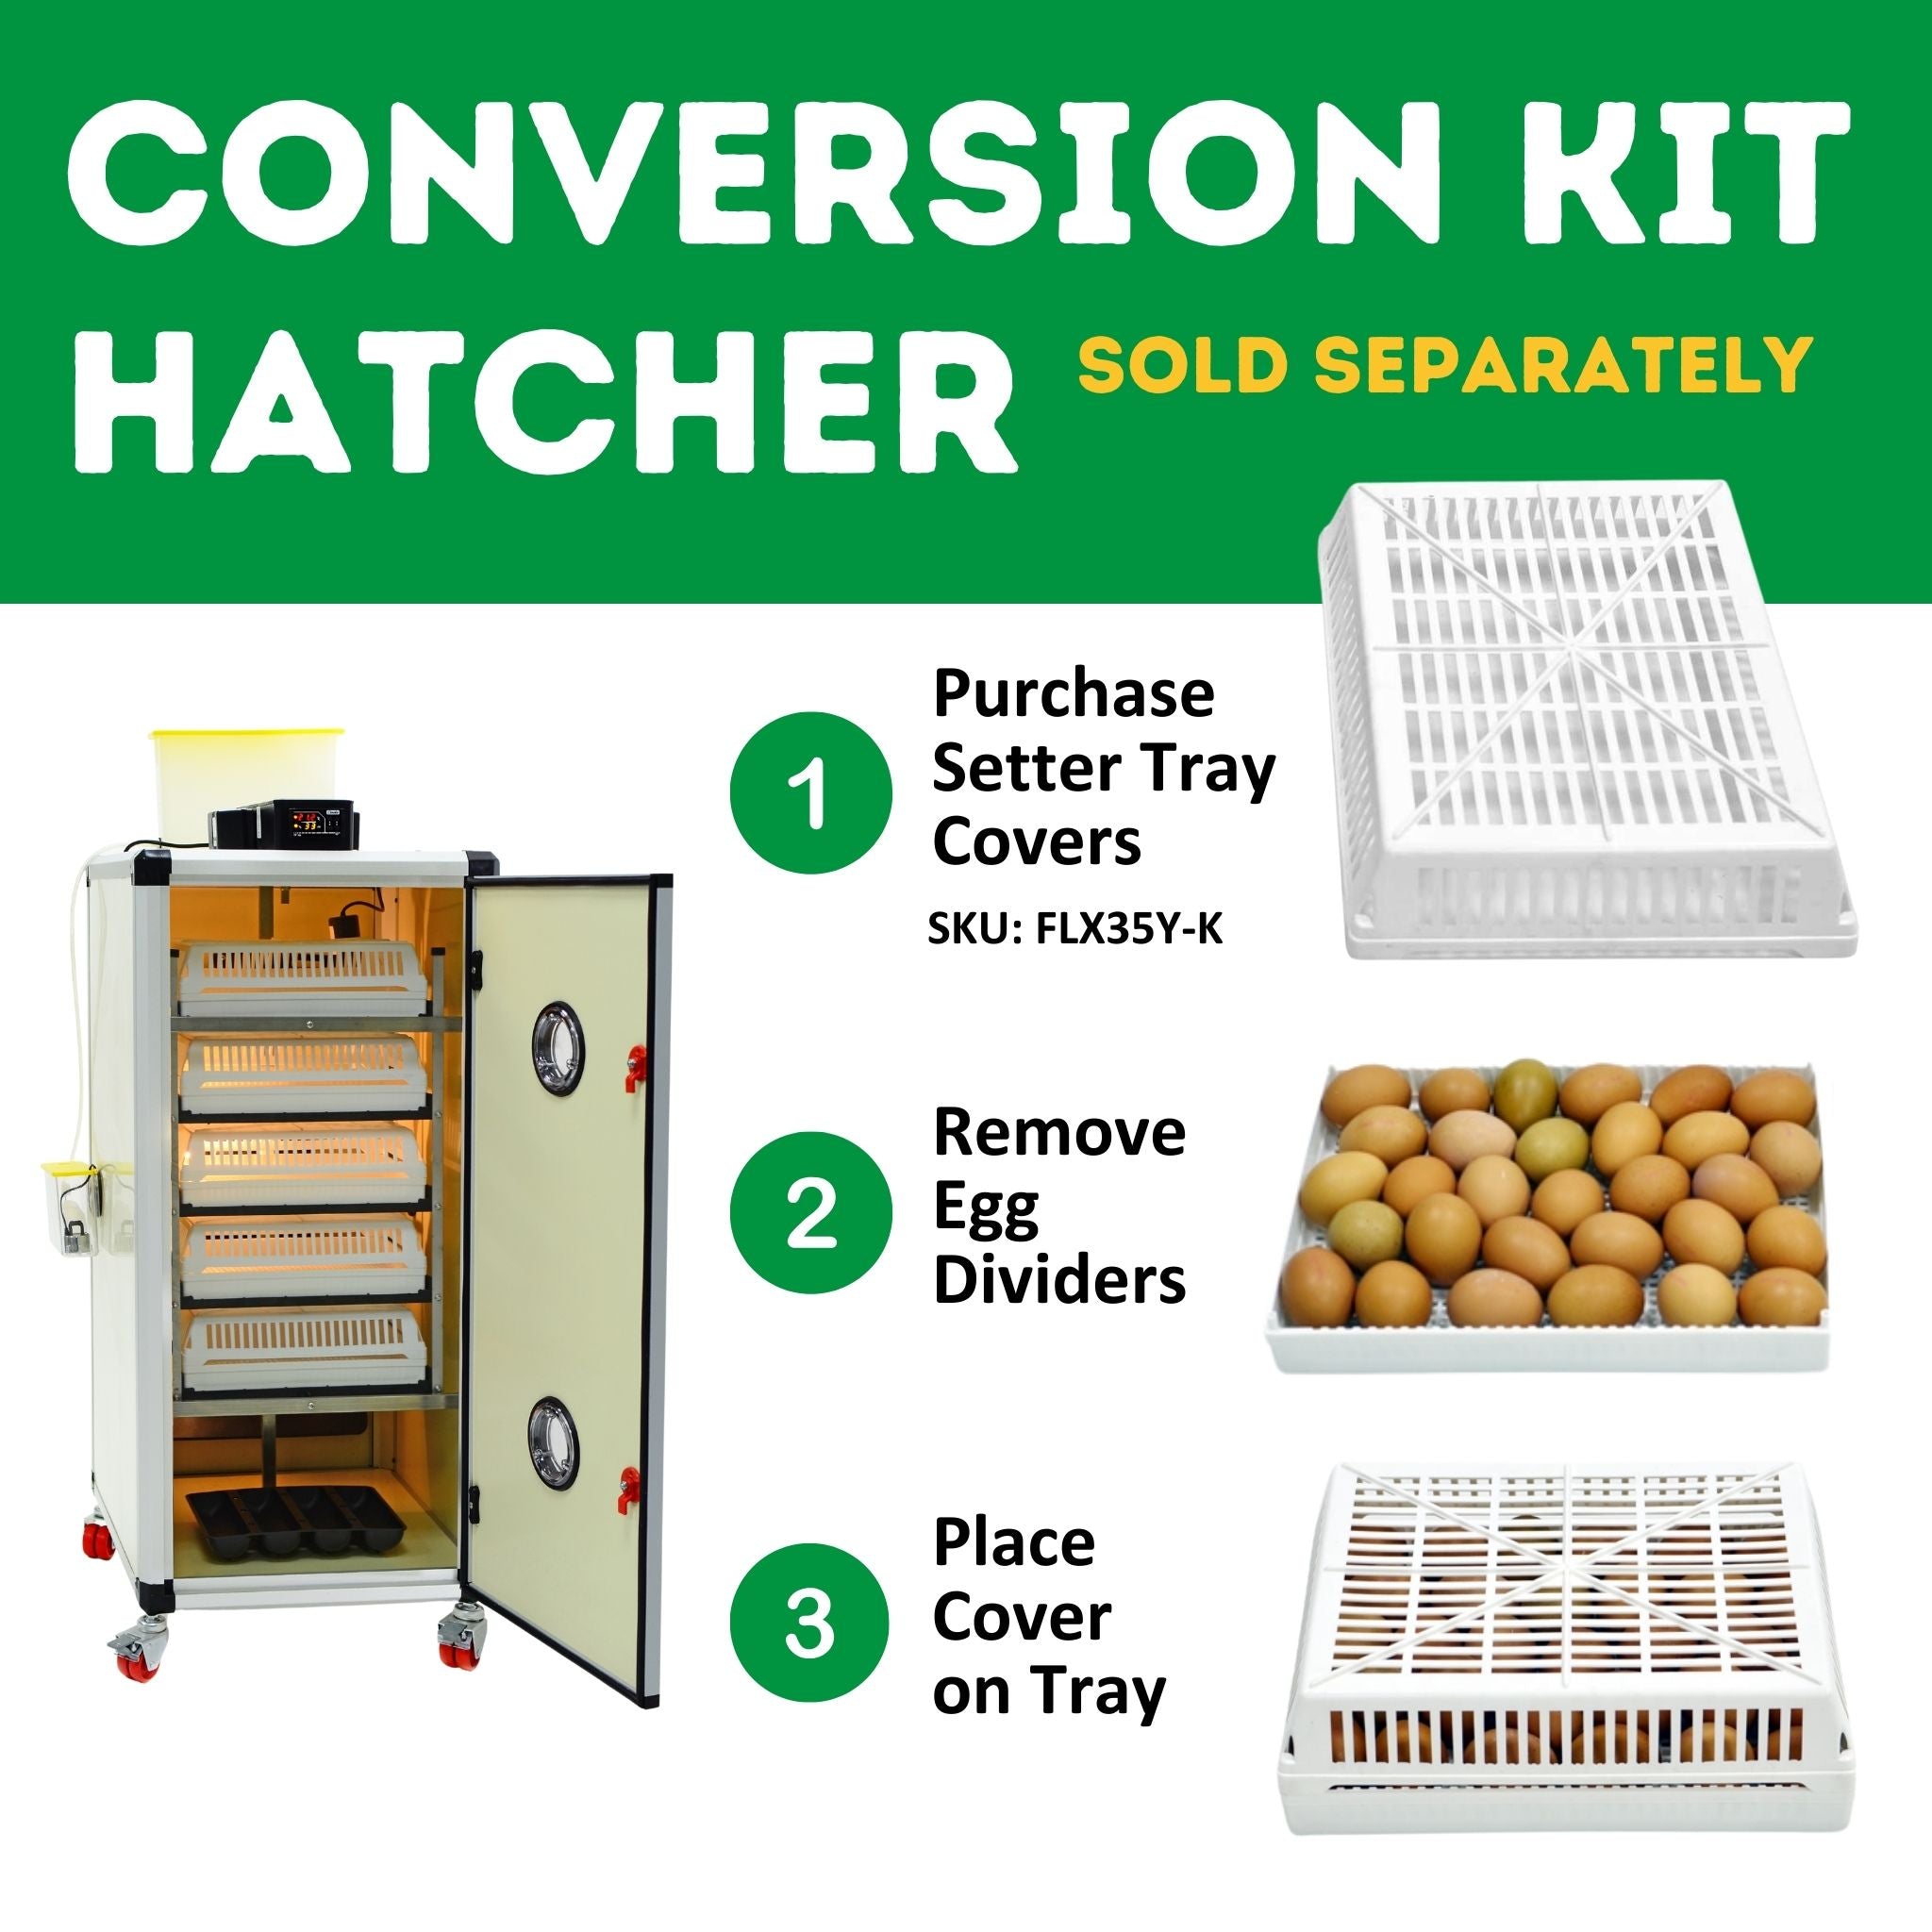 Hatching Time Cimuka. Image shows steps to apply a conversion kit for Hatcher  assembly.